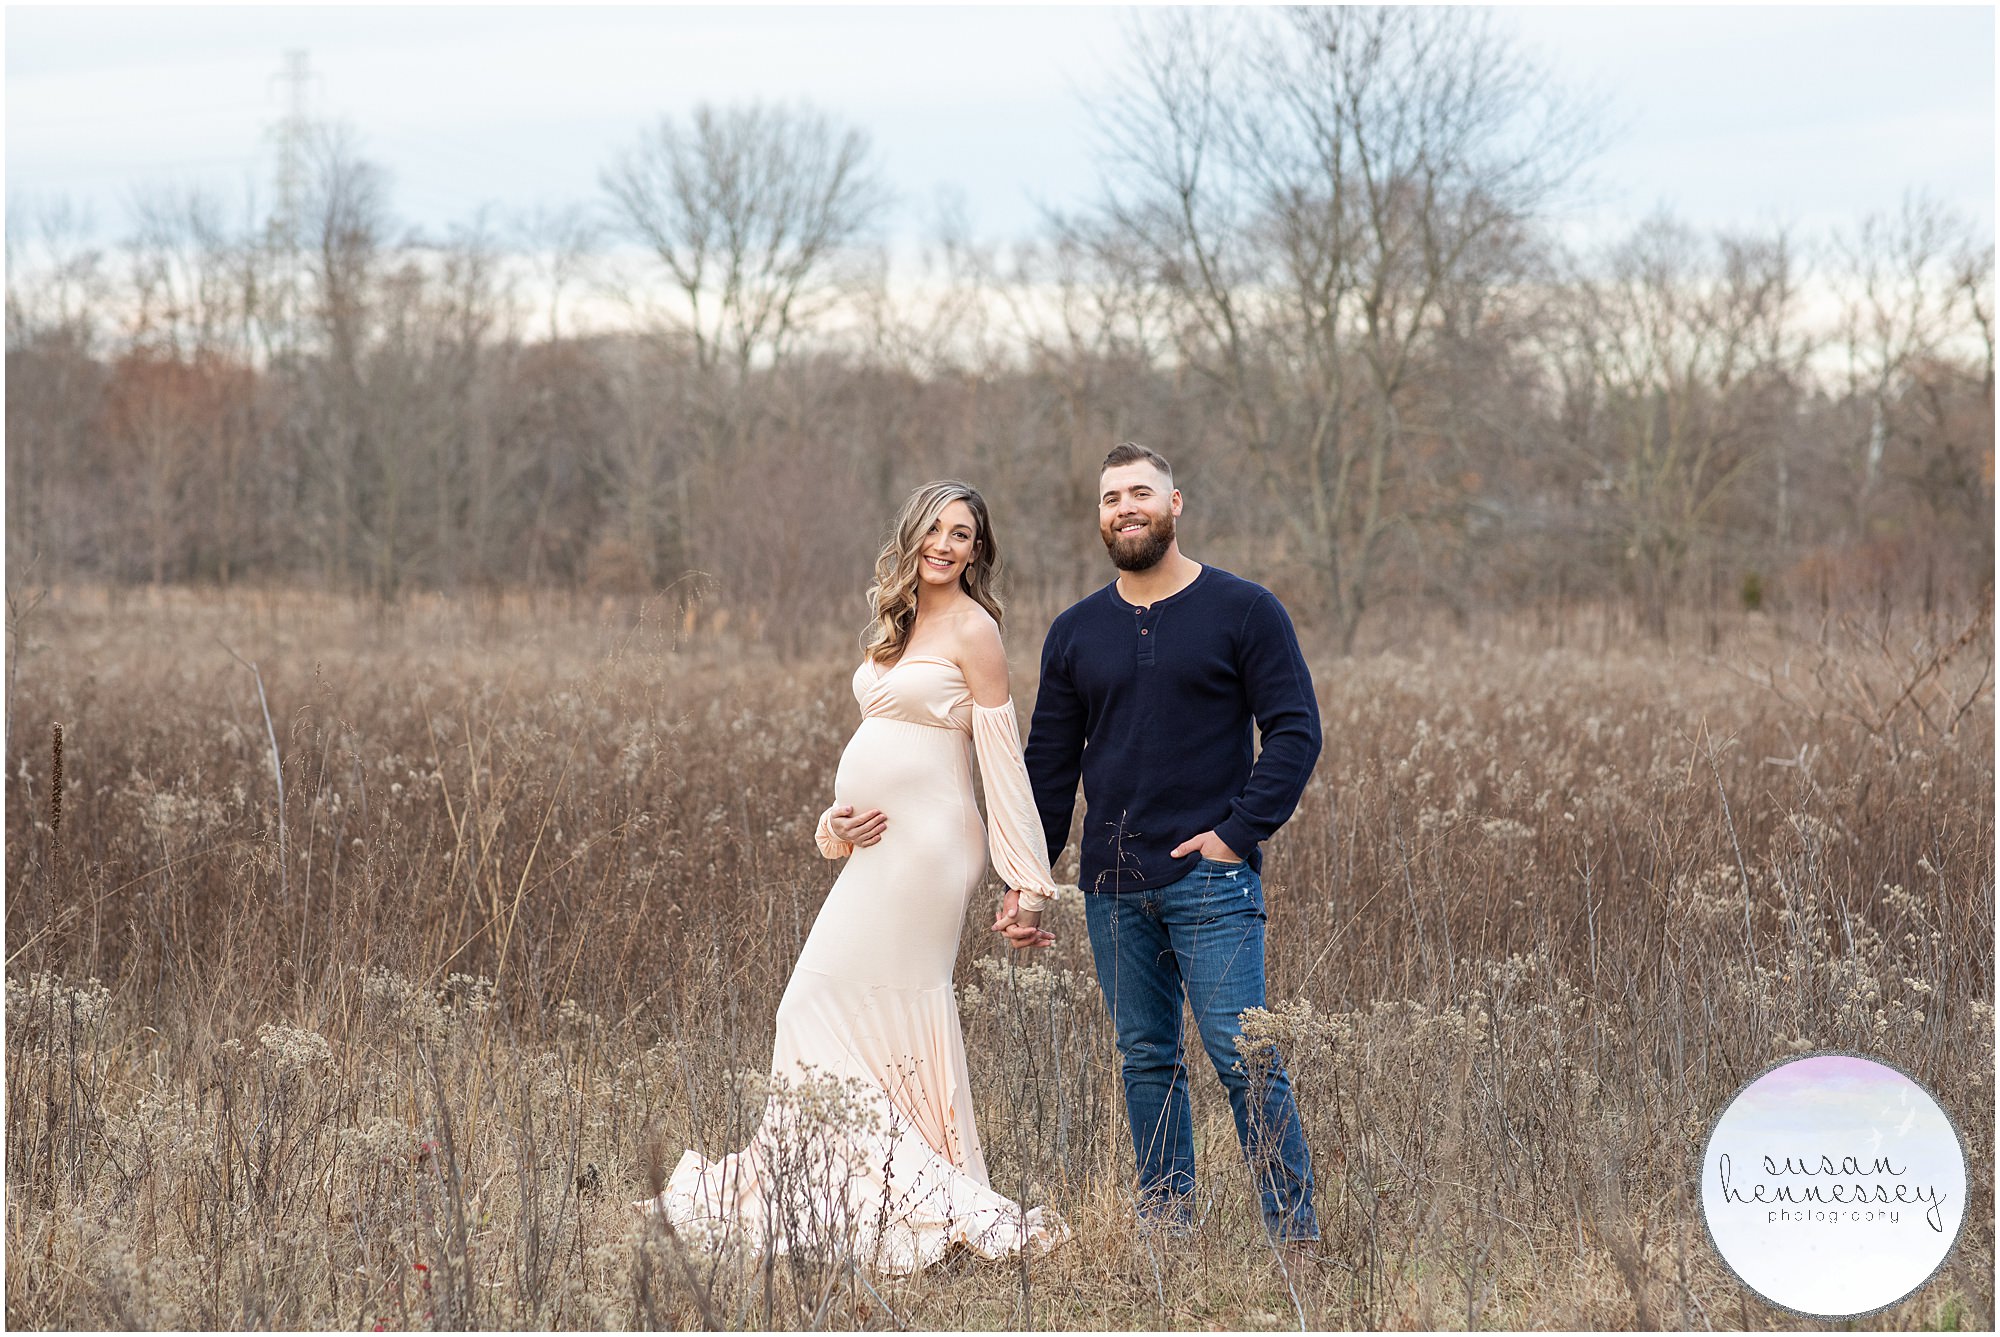 South Jersey Maternity Photographer, Susan Hennessey Photography